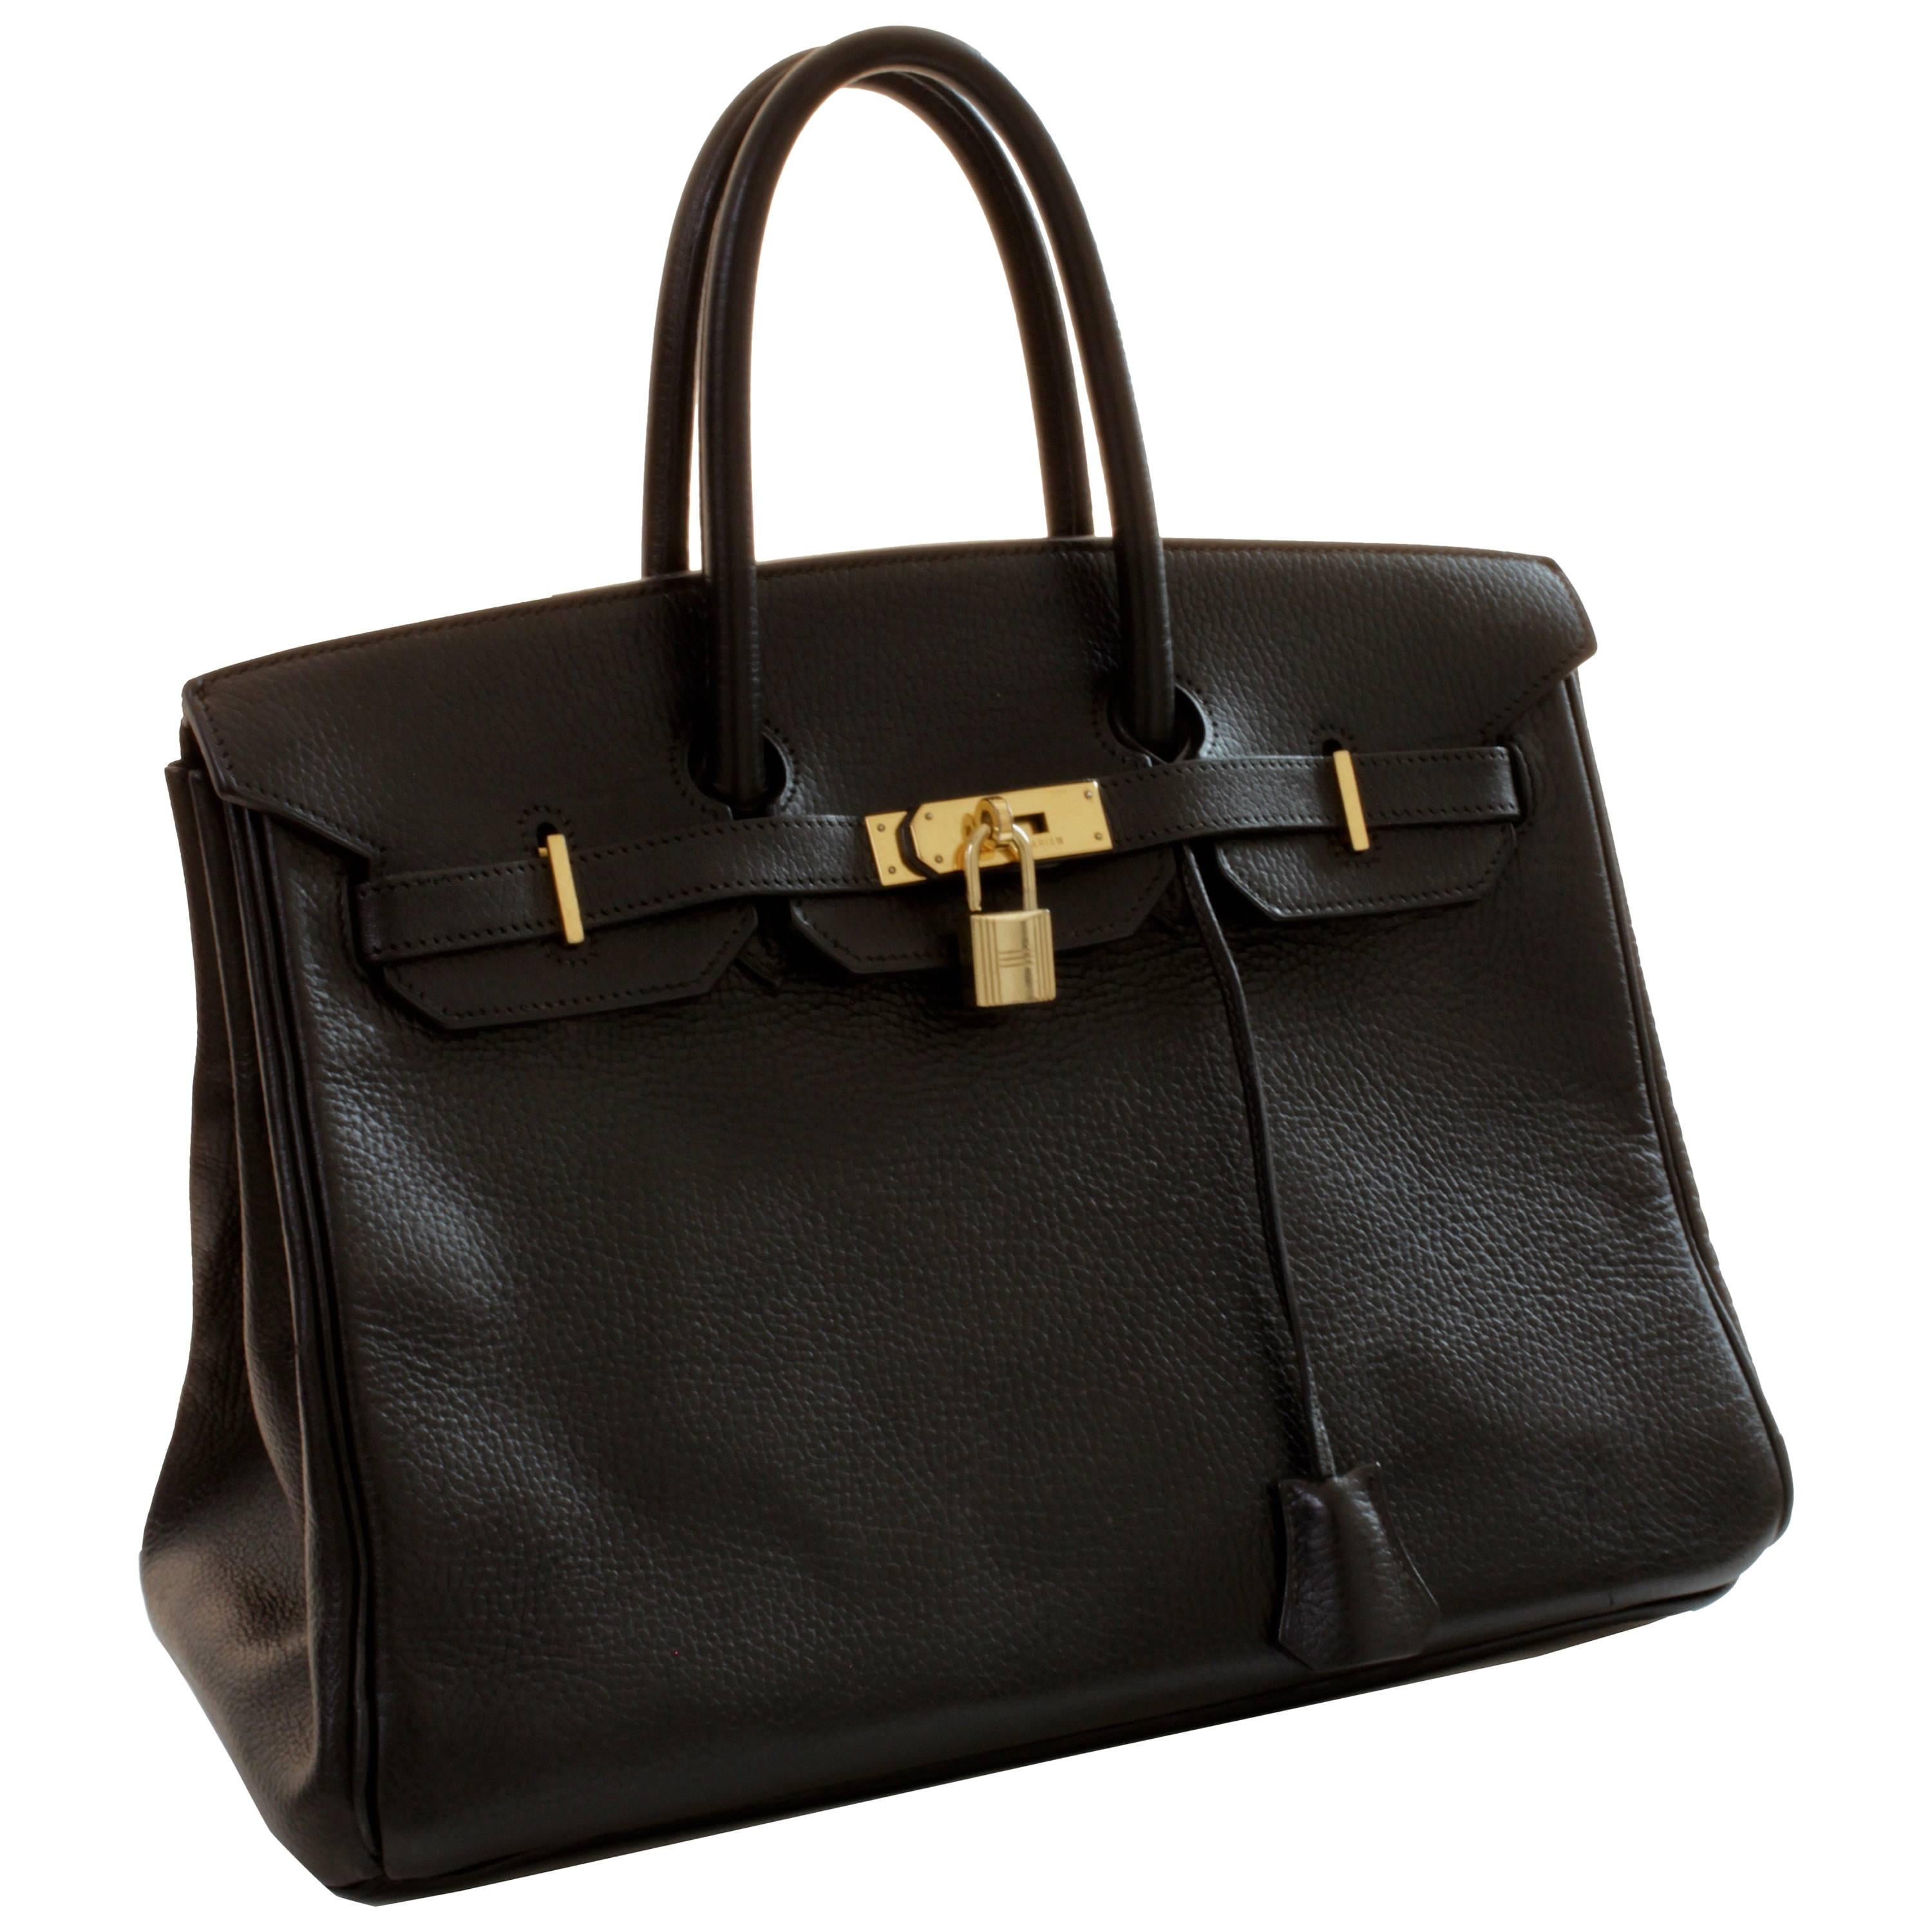 This Birkin is a lovely example of Hermes fine craftsmanship. Made from black Ardennes leather, which is one of the more durable and resilient hides and is no longer manufactured by Hermes. This iconic bag also features gold hardware. In very good